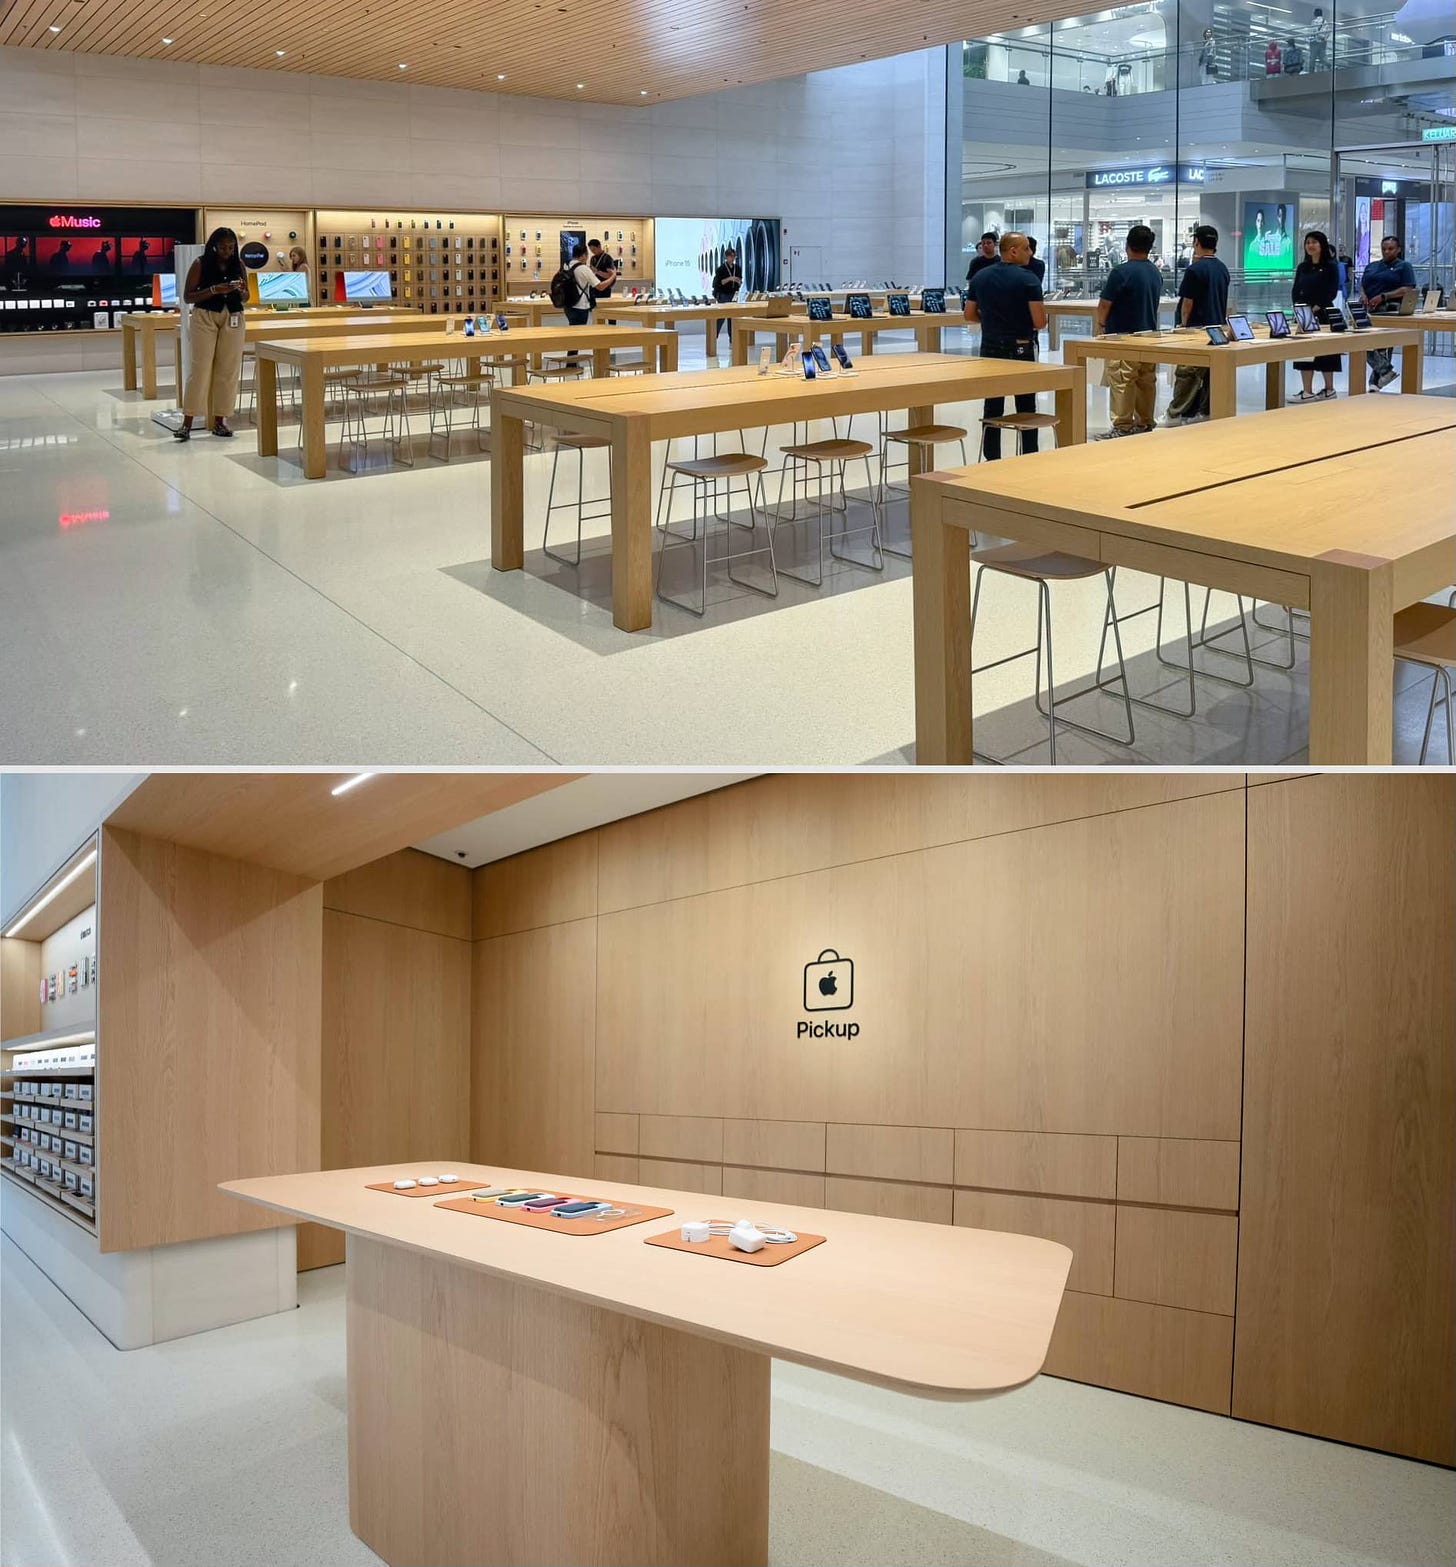 A collage of two photos showing level 1 at Apple The Exchange TRX and the dedicated Apple Pickup counter, which is built into the Avenues.